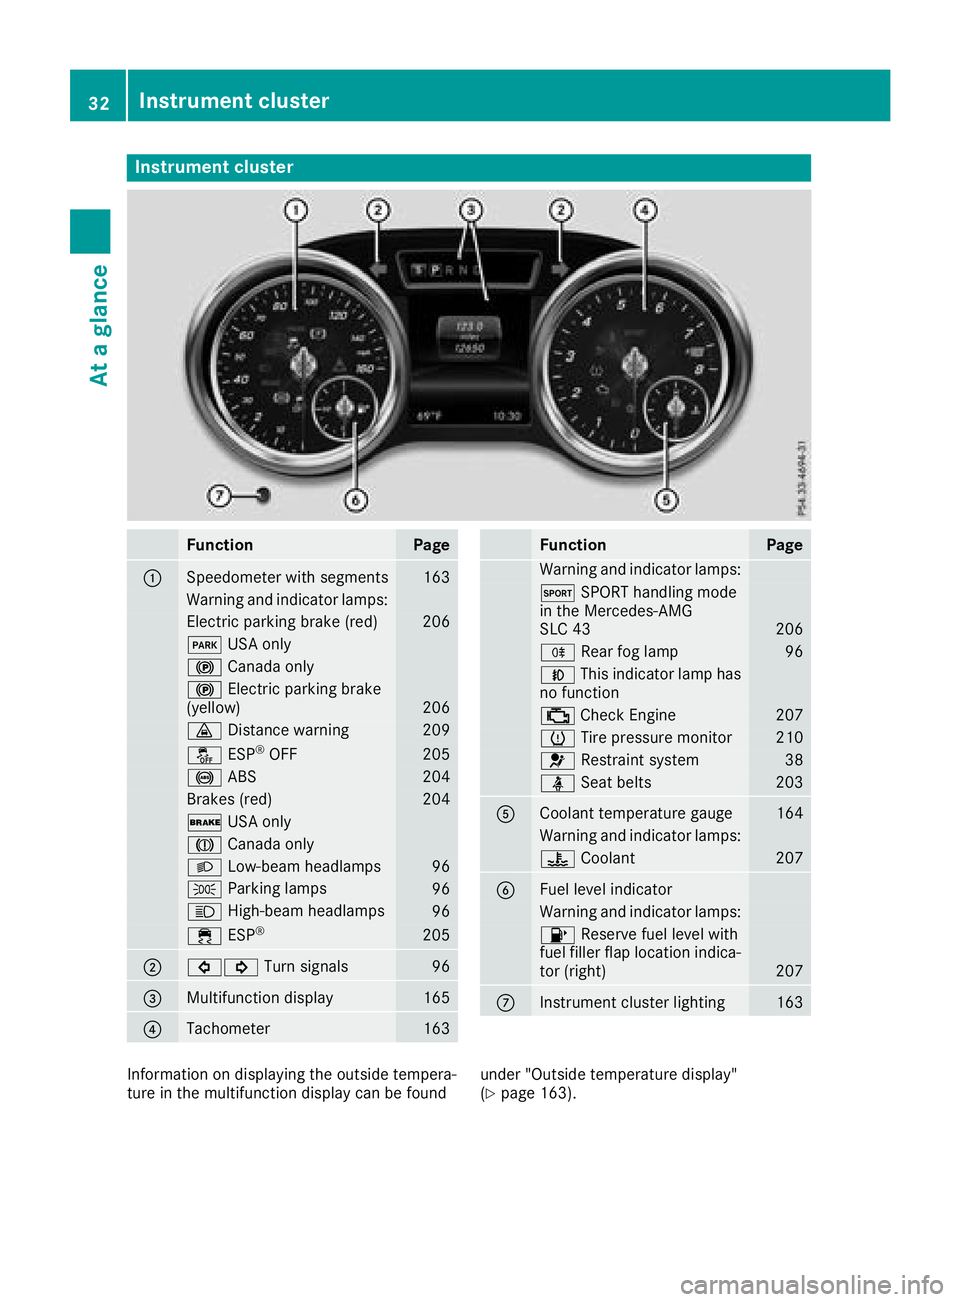 MERCEDES-BENZ SLC ROADSTER 2018 Owners Guide Instrumentcluster
FunctionPag e
:Speedometer wit hsegments163
Warning and indicator lamps:
Electric parking brak e(red)20 6
F USAo nly
! Canad aonly
! Electric parking brak e
(yellow)20 6
· Distanc e